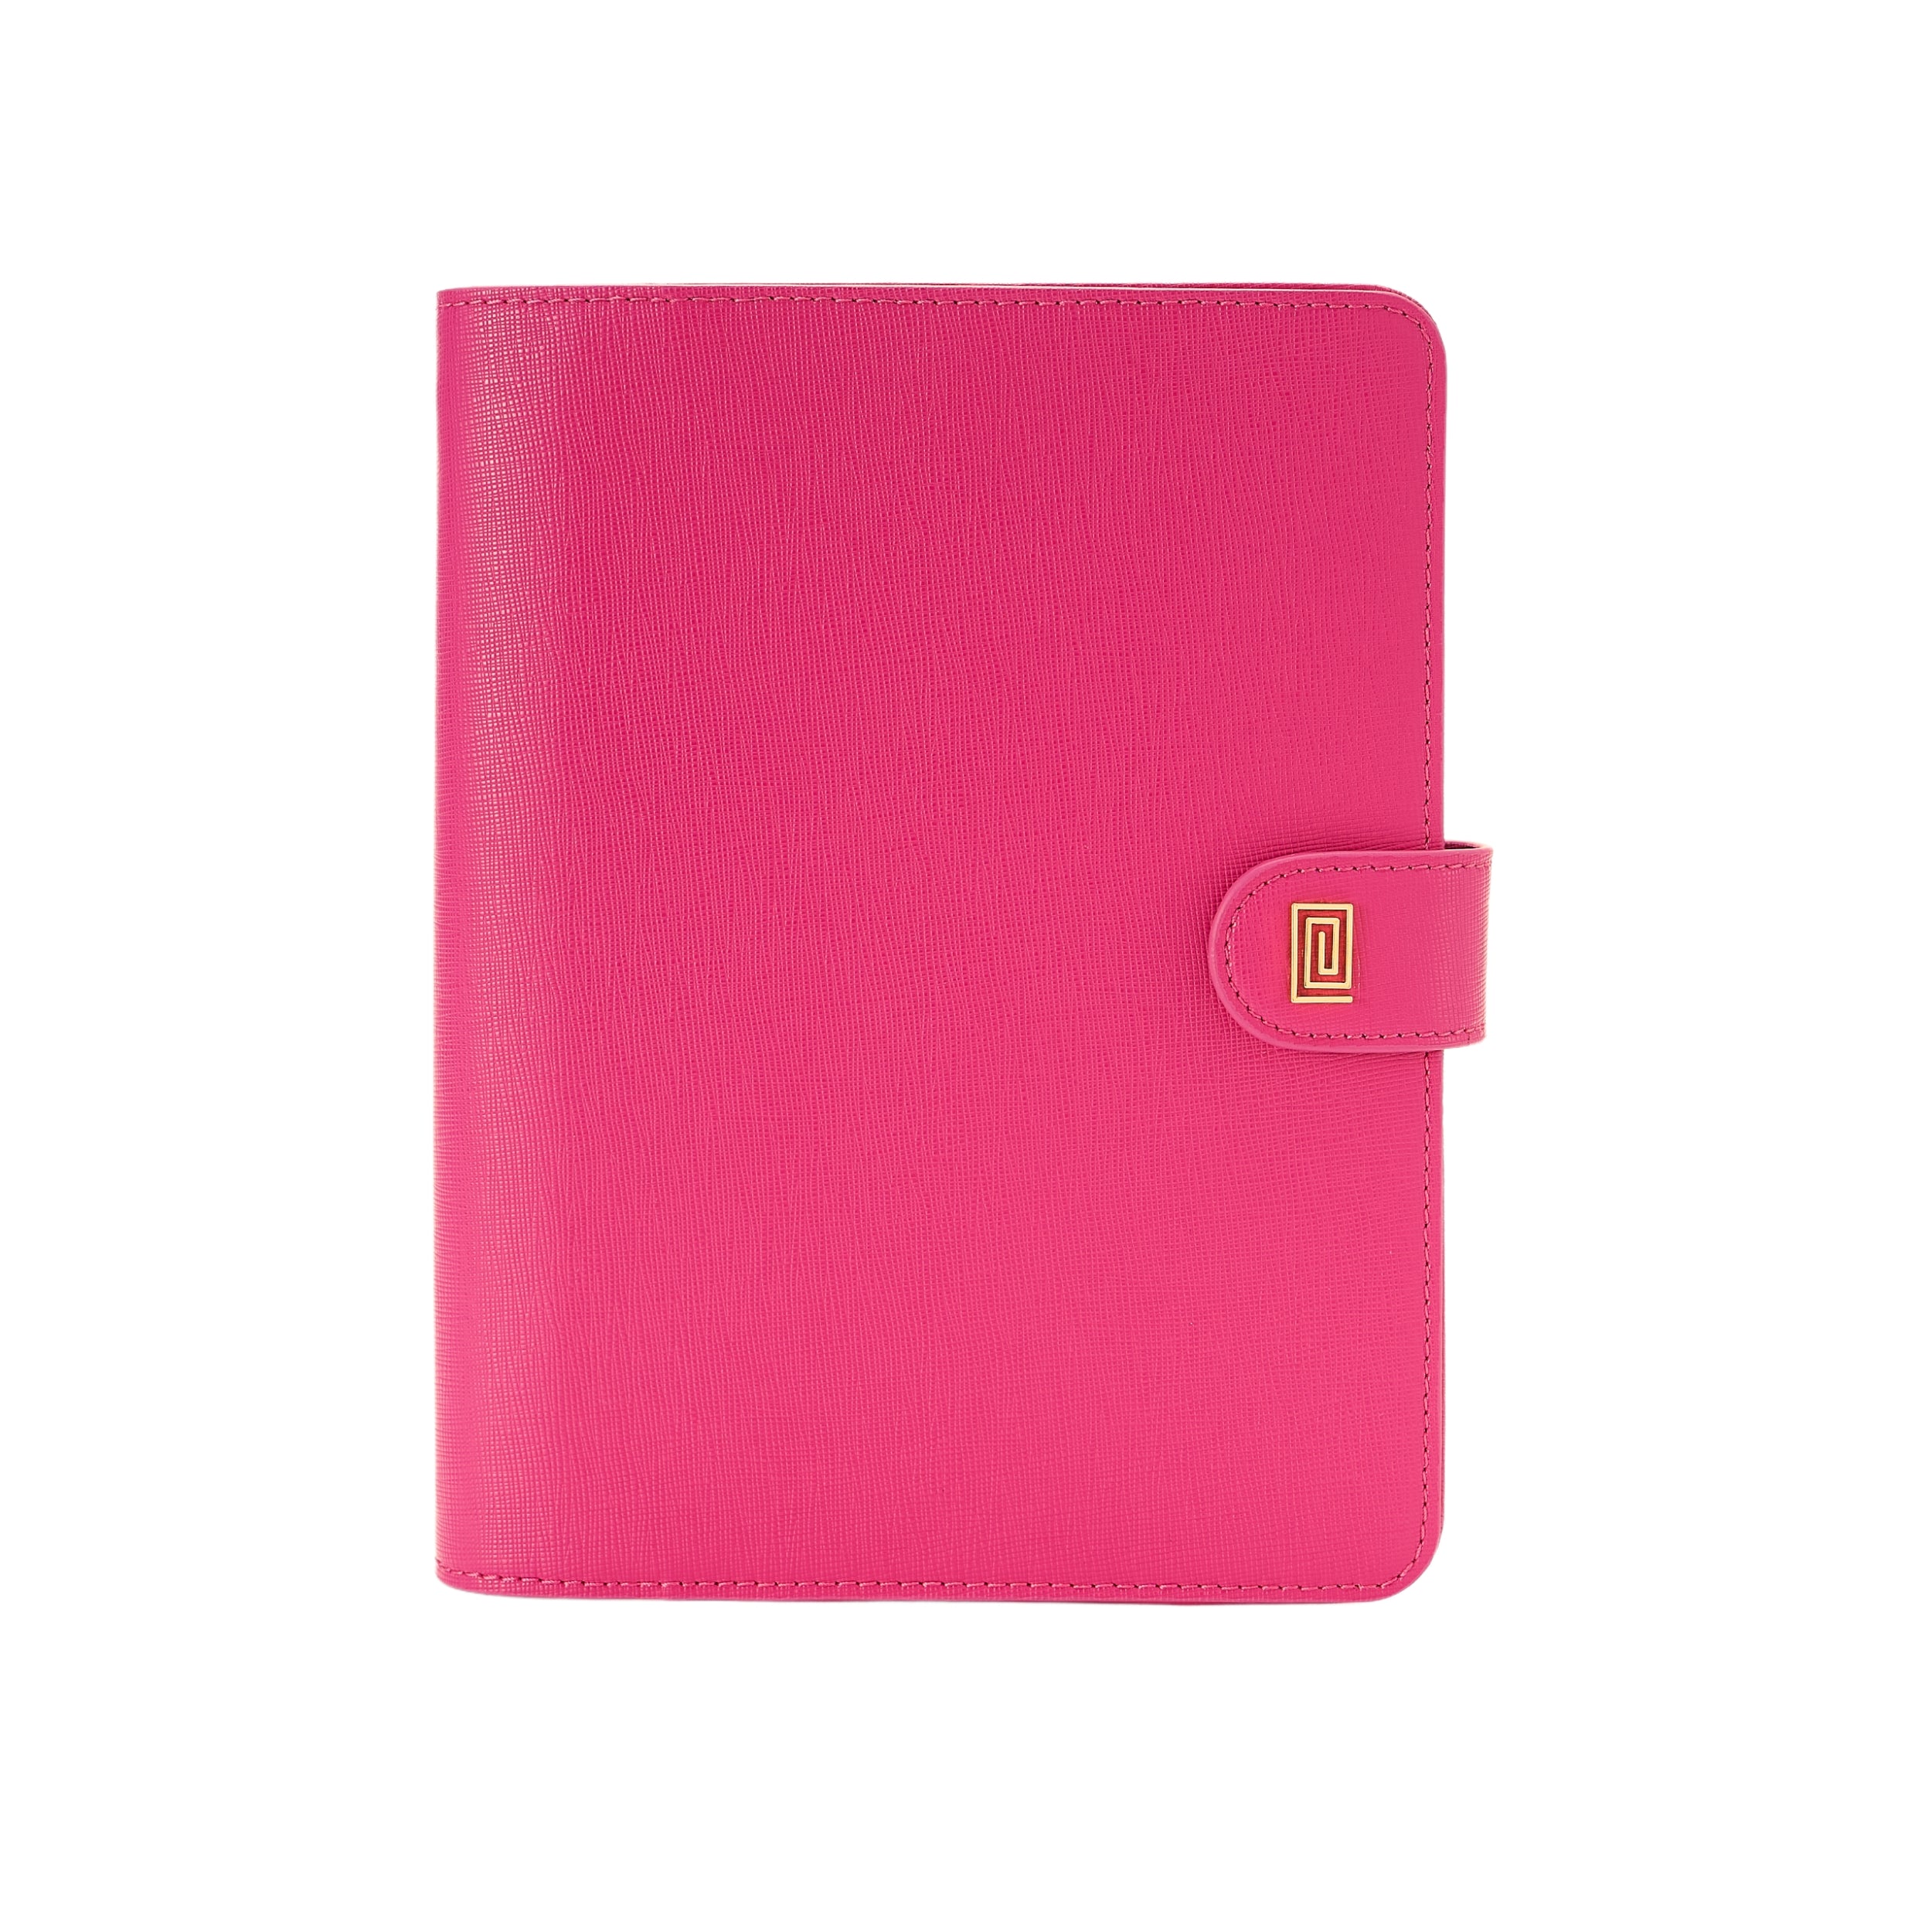 Pink Rose Saffiano Demi Ring | OUTLET | MM3. Demi Ring Agenda | A5 Planner Cover | Final Sale | NOTIQ